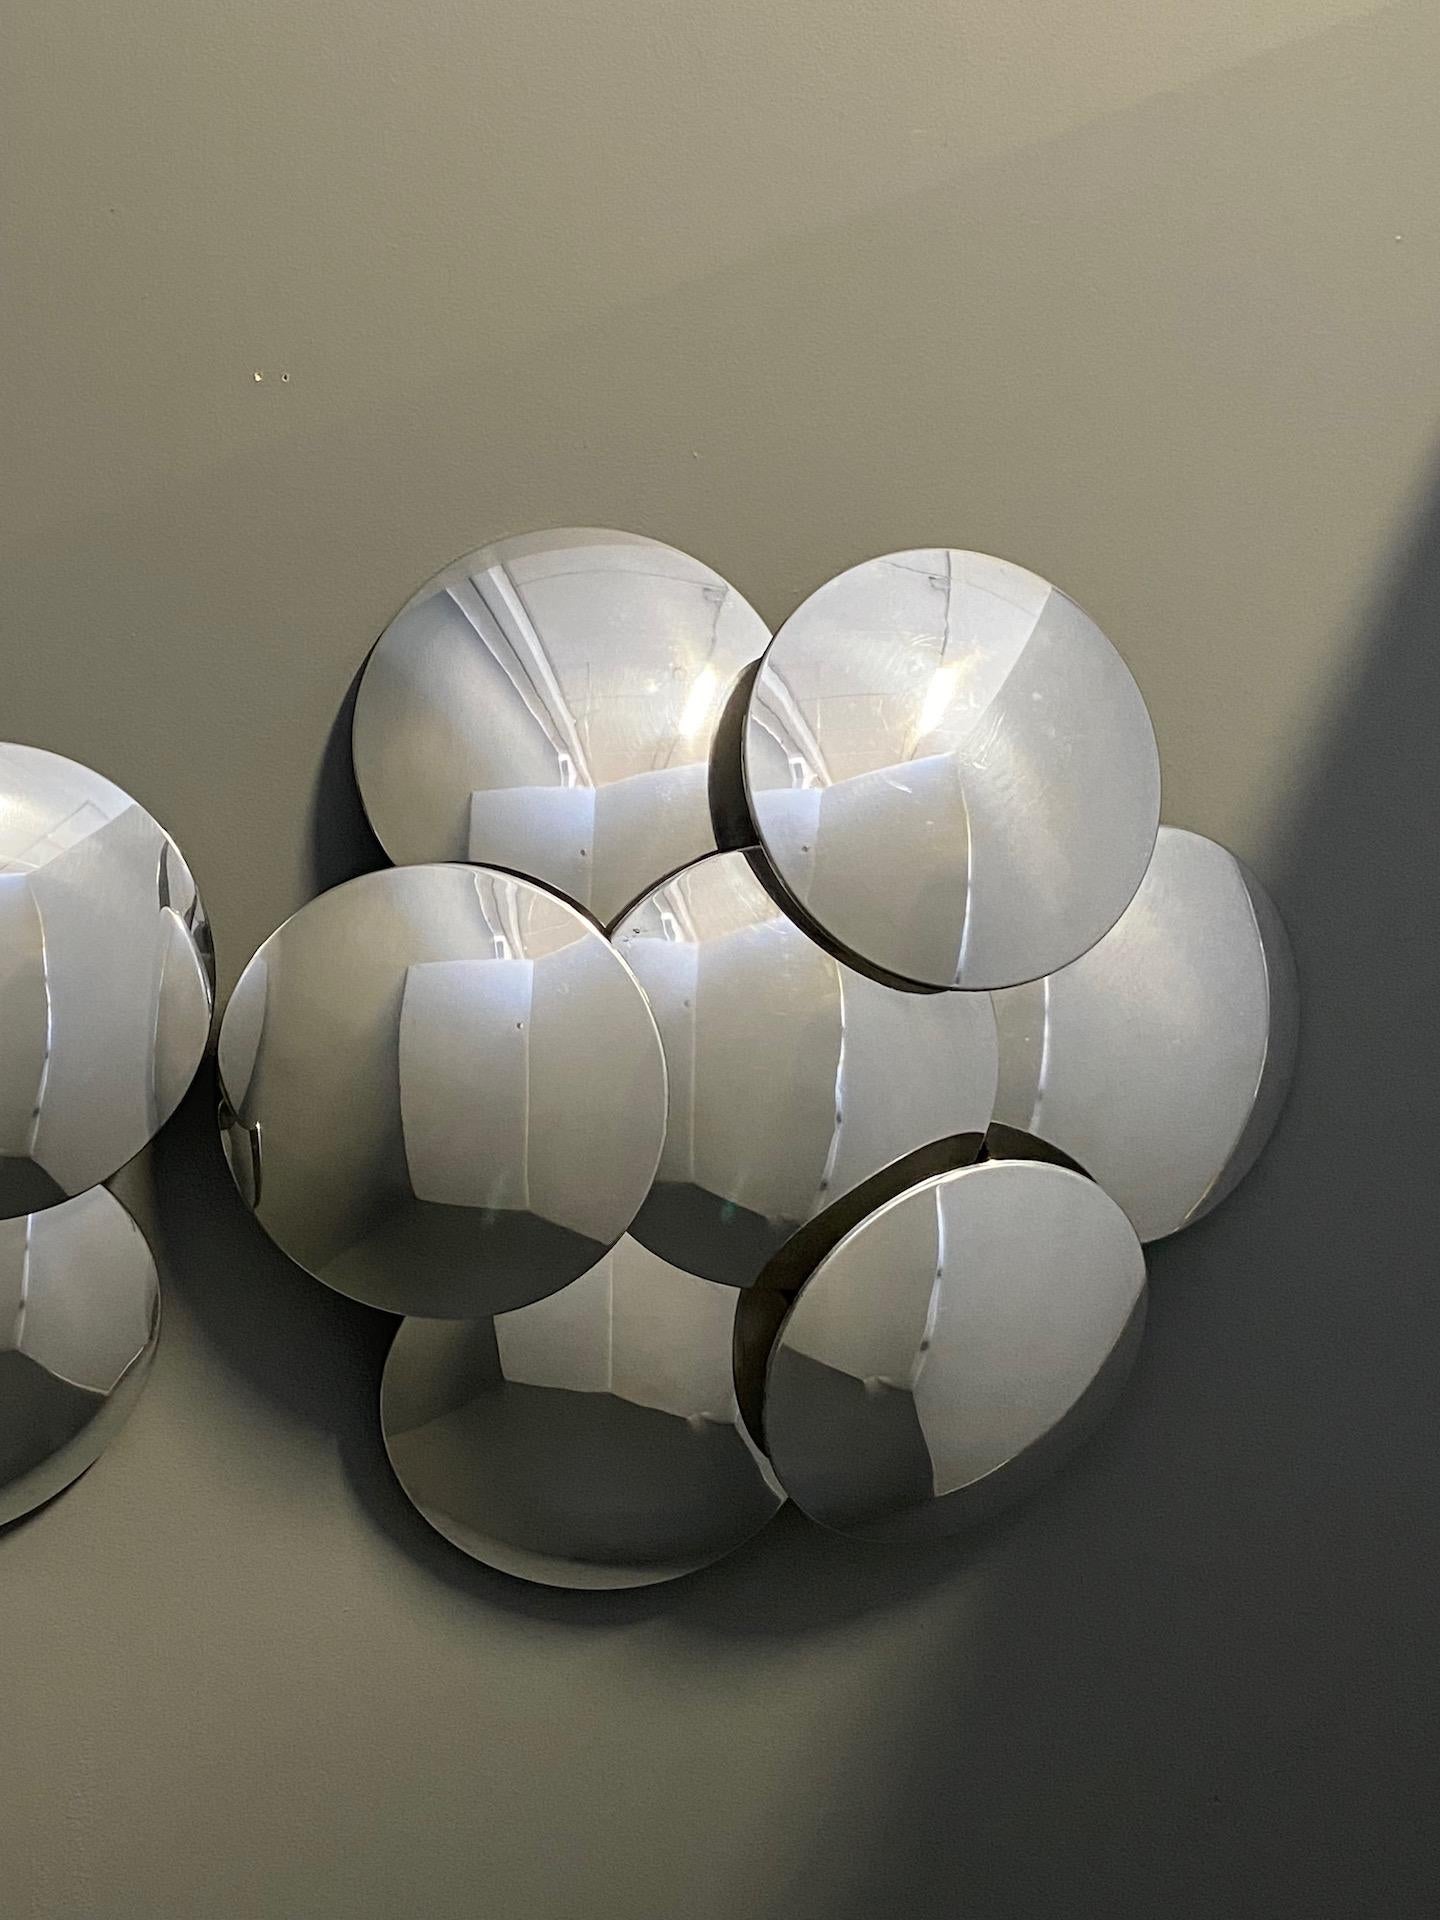 Rare pair big Reggiani seven convex disc wall sconce, 1970s, Italiy Whit Label.
Available 3 pair.